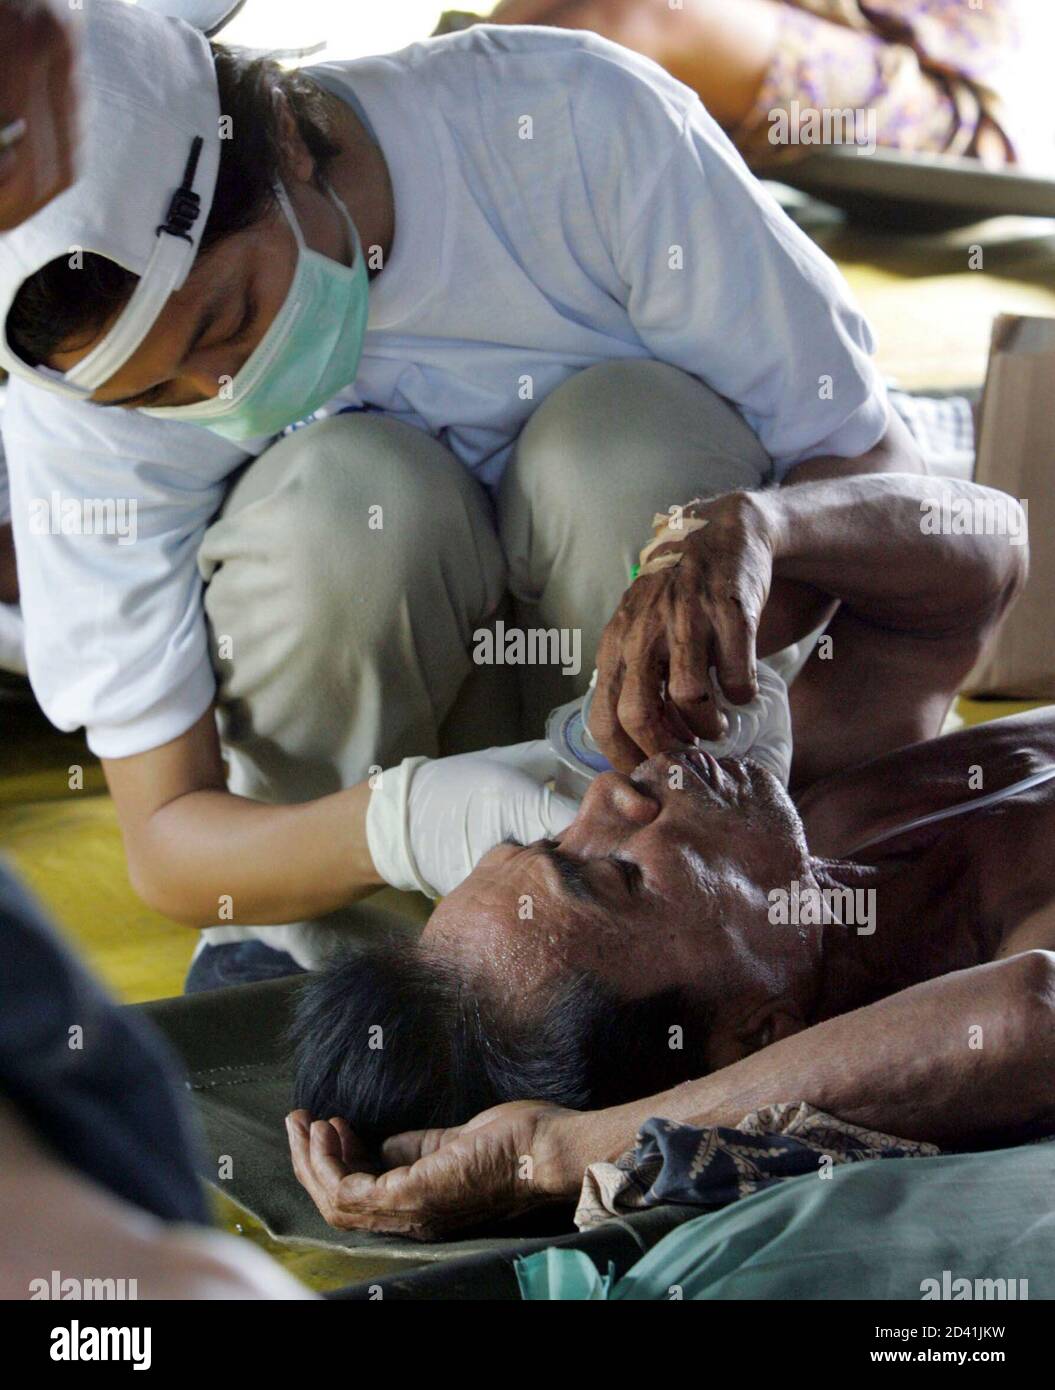 A tsunami survivor is treated by a medic in a makeshift clinic at Banda Aceh airport, Indonesia. Aid workers cleared landing strips in Asia's flooded tsunami-hit regions to start flying food, clean water and doctors to hungry and injured survivors, but the global relief operation continued to struggle on Tuesday. REUTERS/Yuriko Nakao  YN/FA Stock Photo